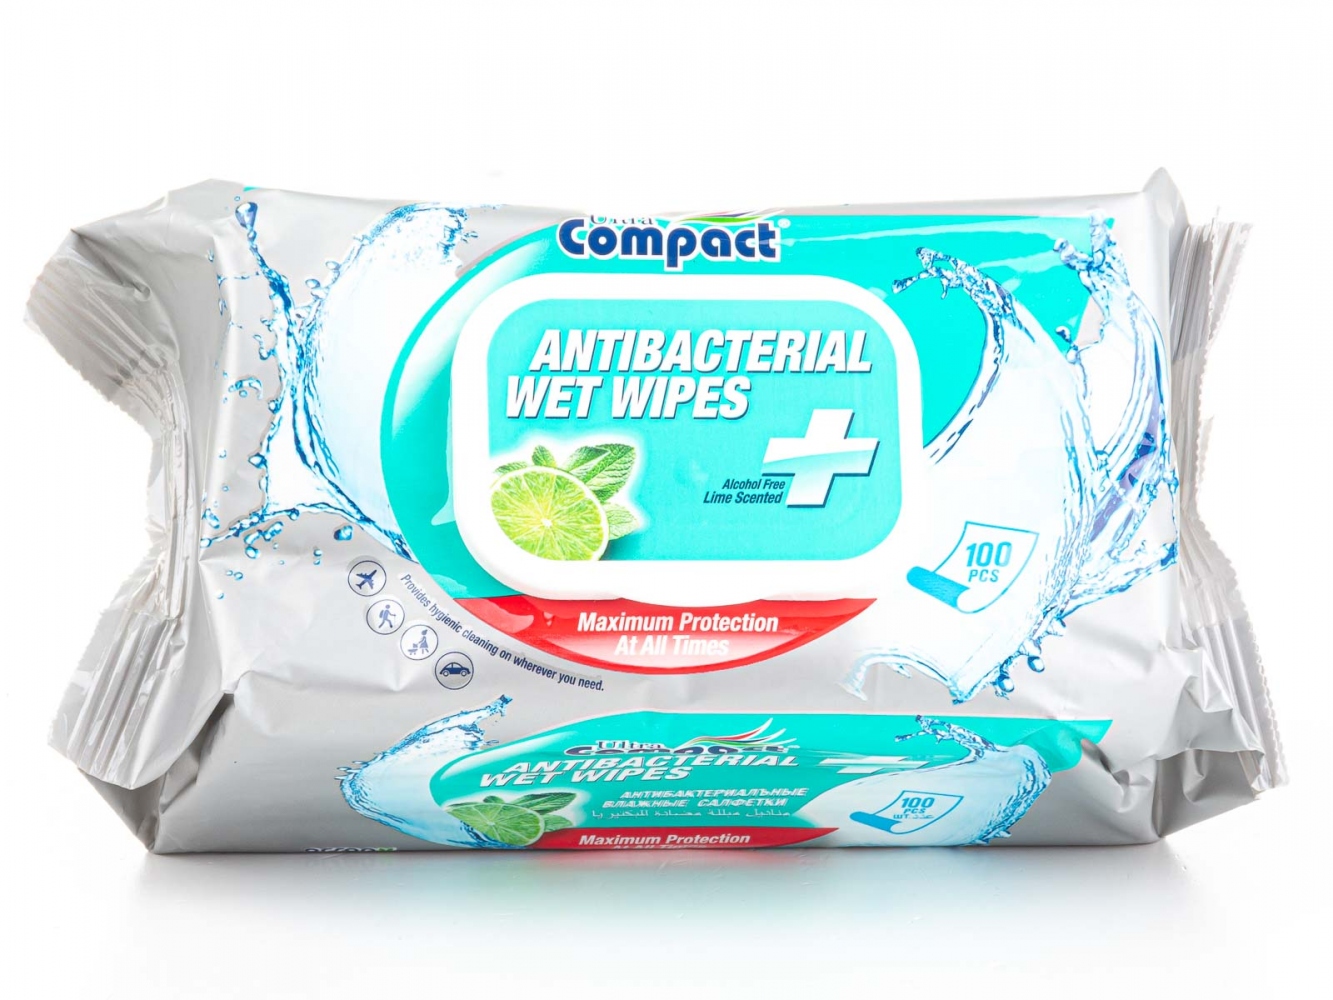 pics/piramed/ultra-compact-antibacterial-wet-wipes-covid-19-protection-front.jpg